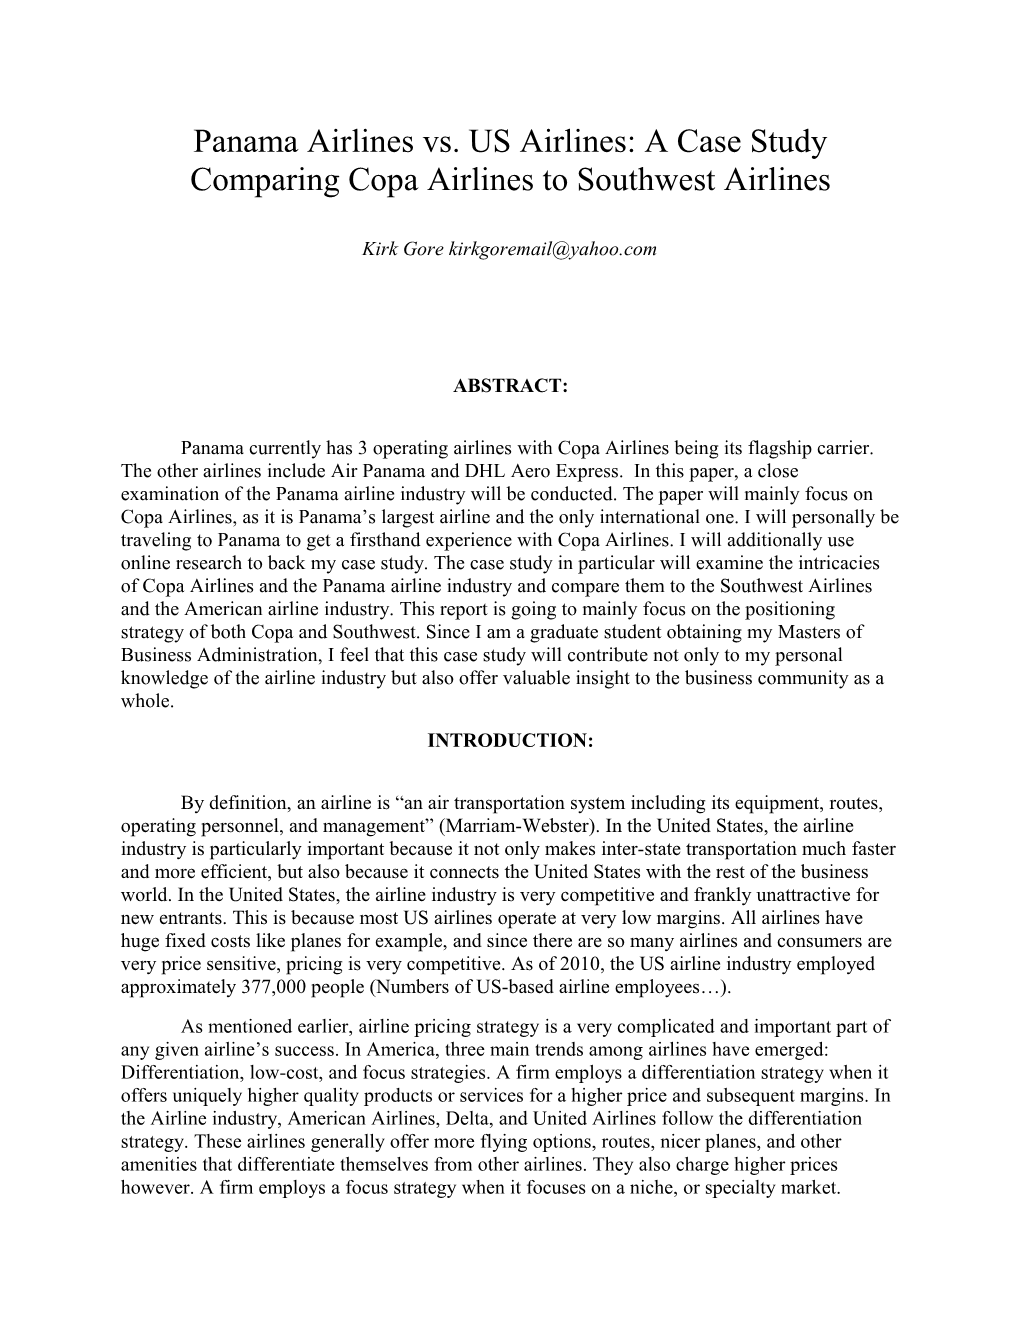 Panama Airlines Vs. US Airlines: a Case Study Comparing Copa Airlines to Southwest Airlines